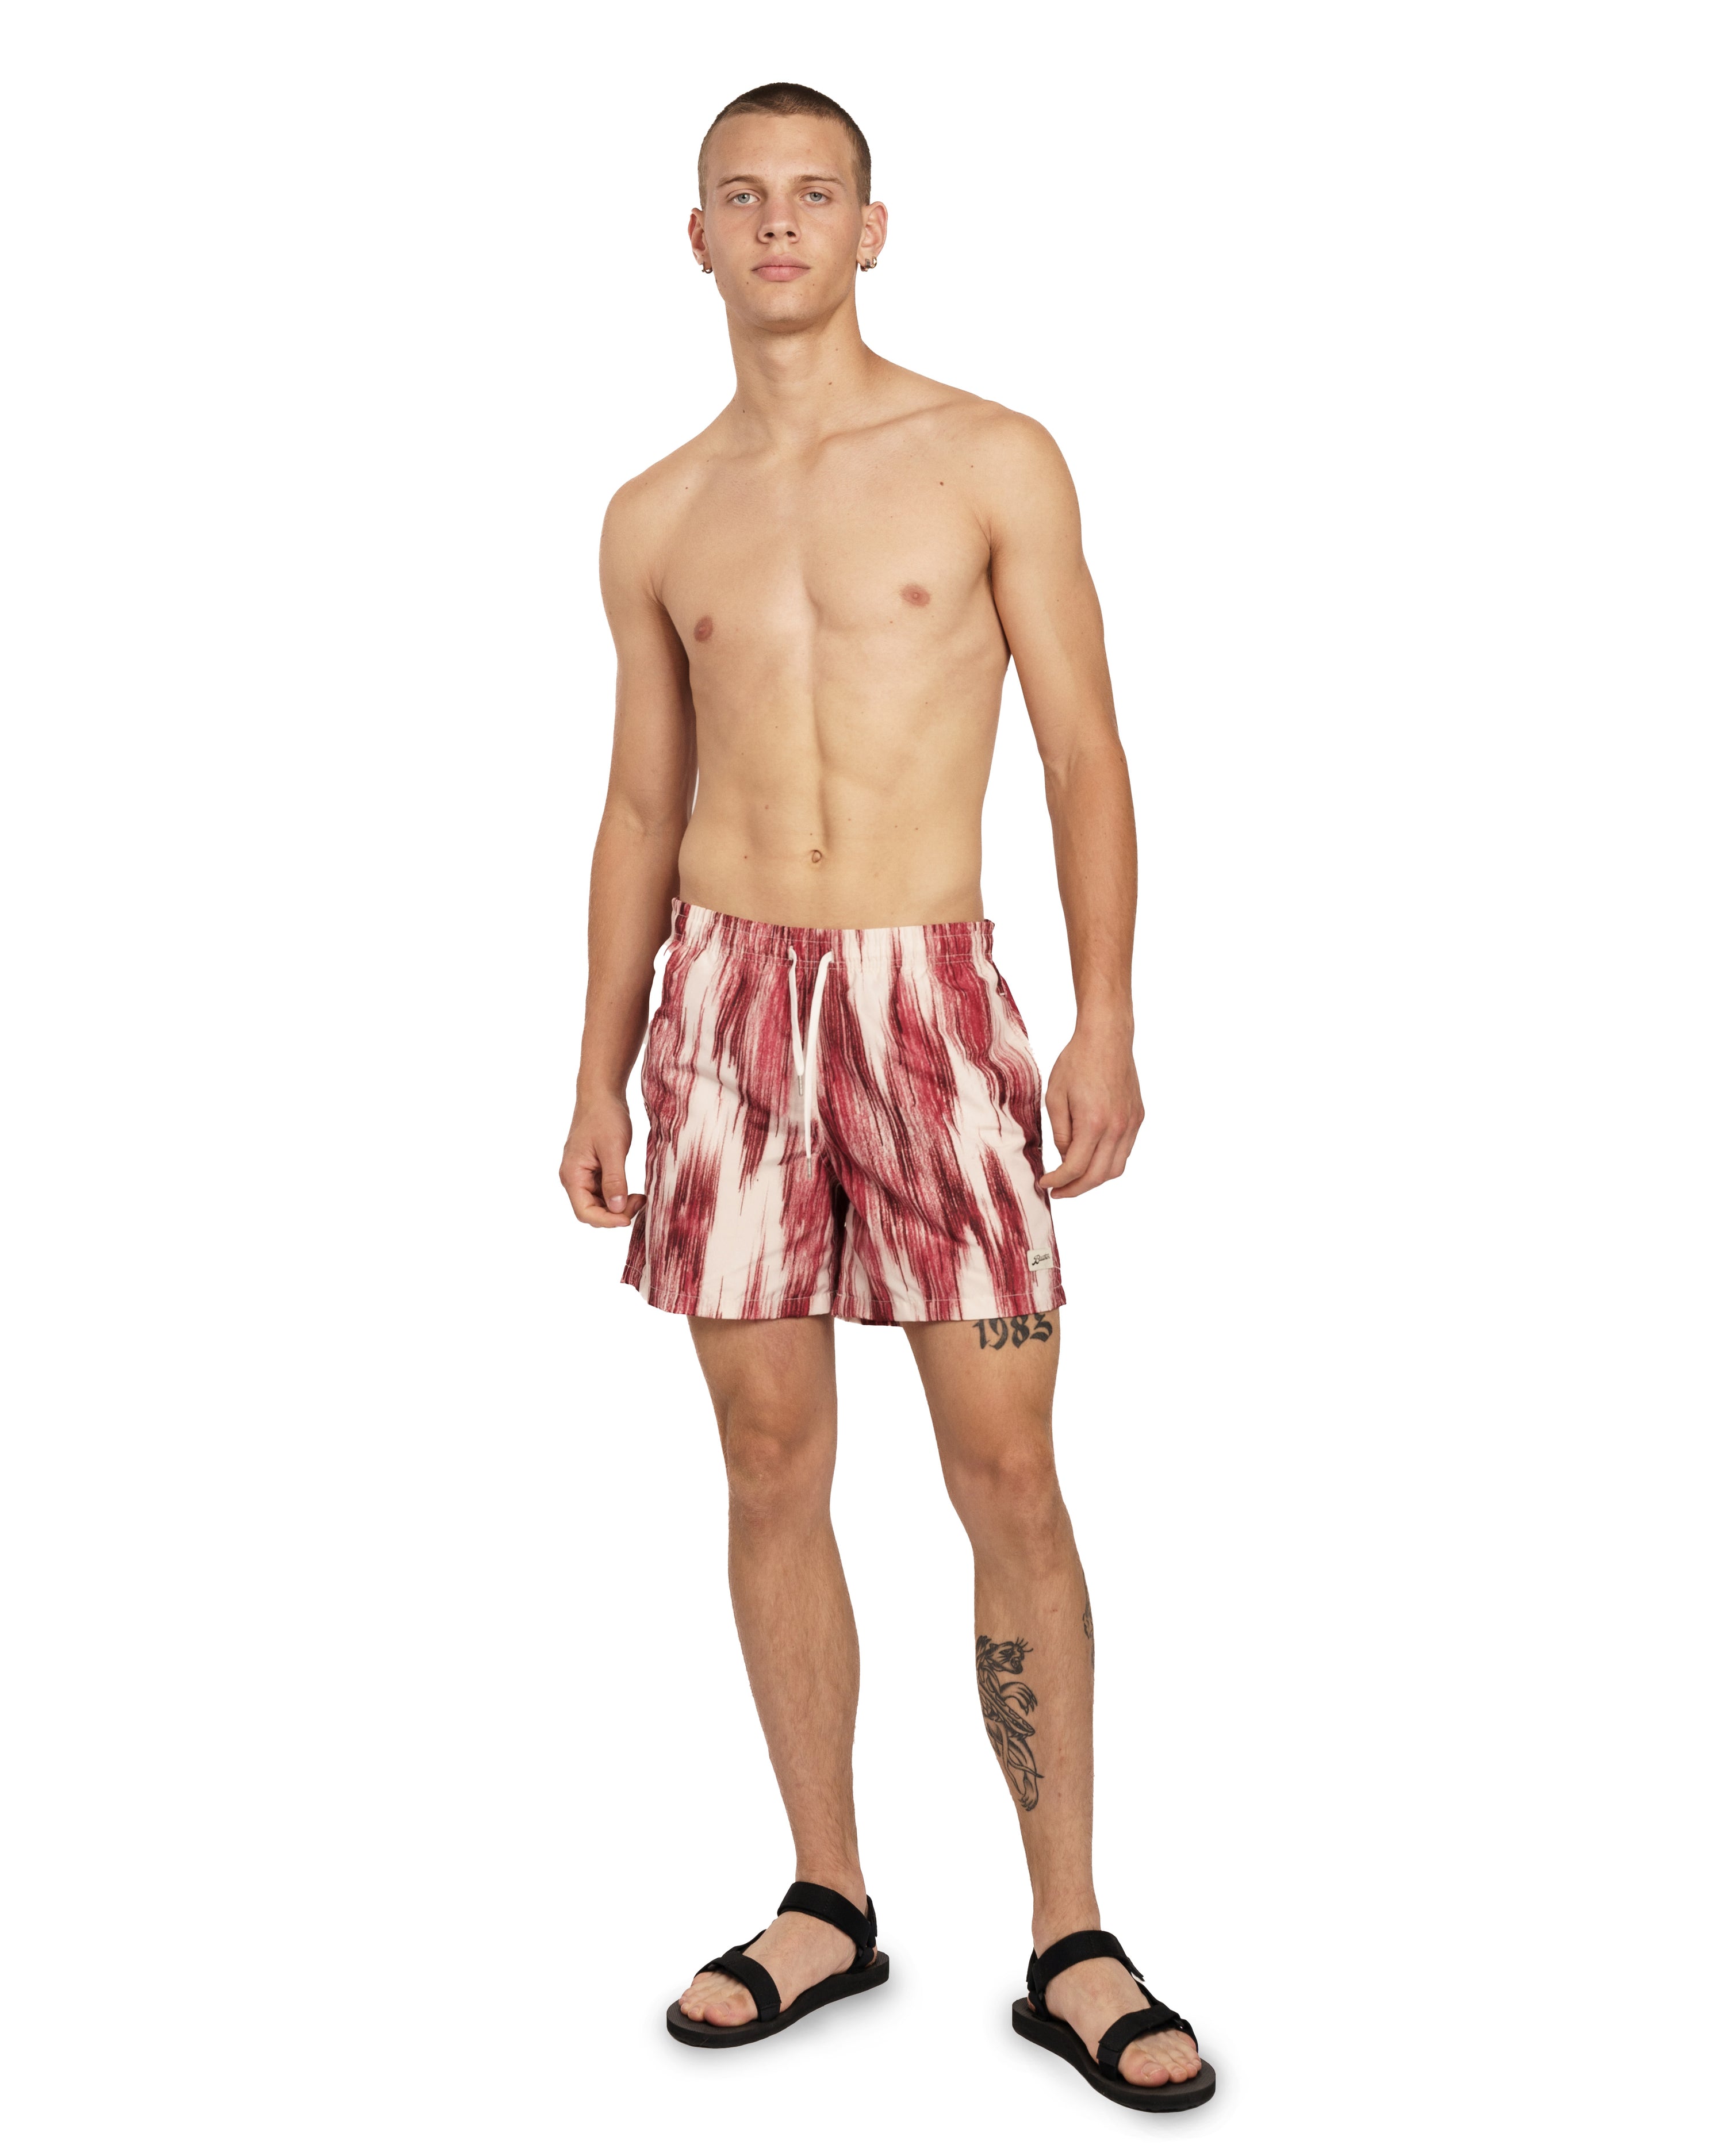 model wearing red and white Bather swim trunk with a color clashing pattern